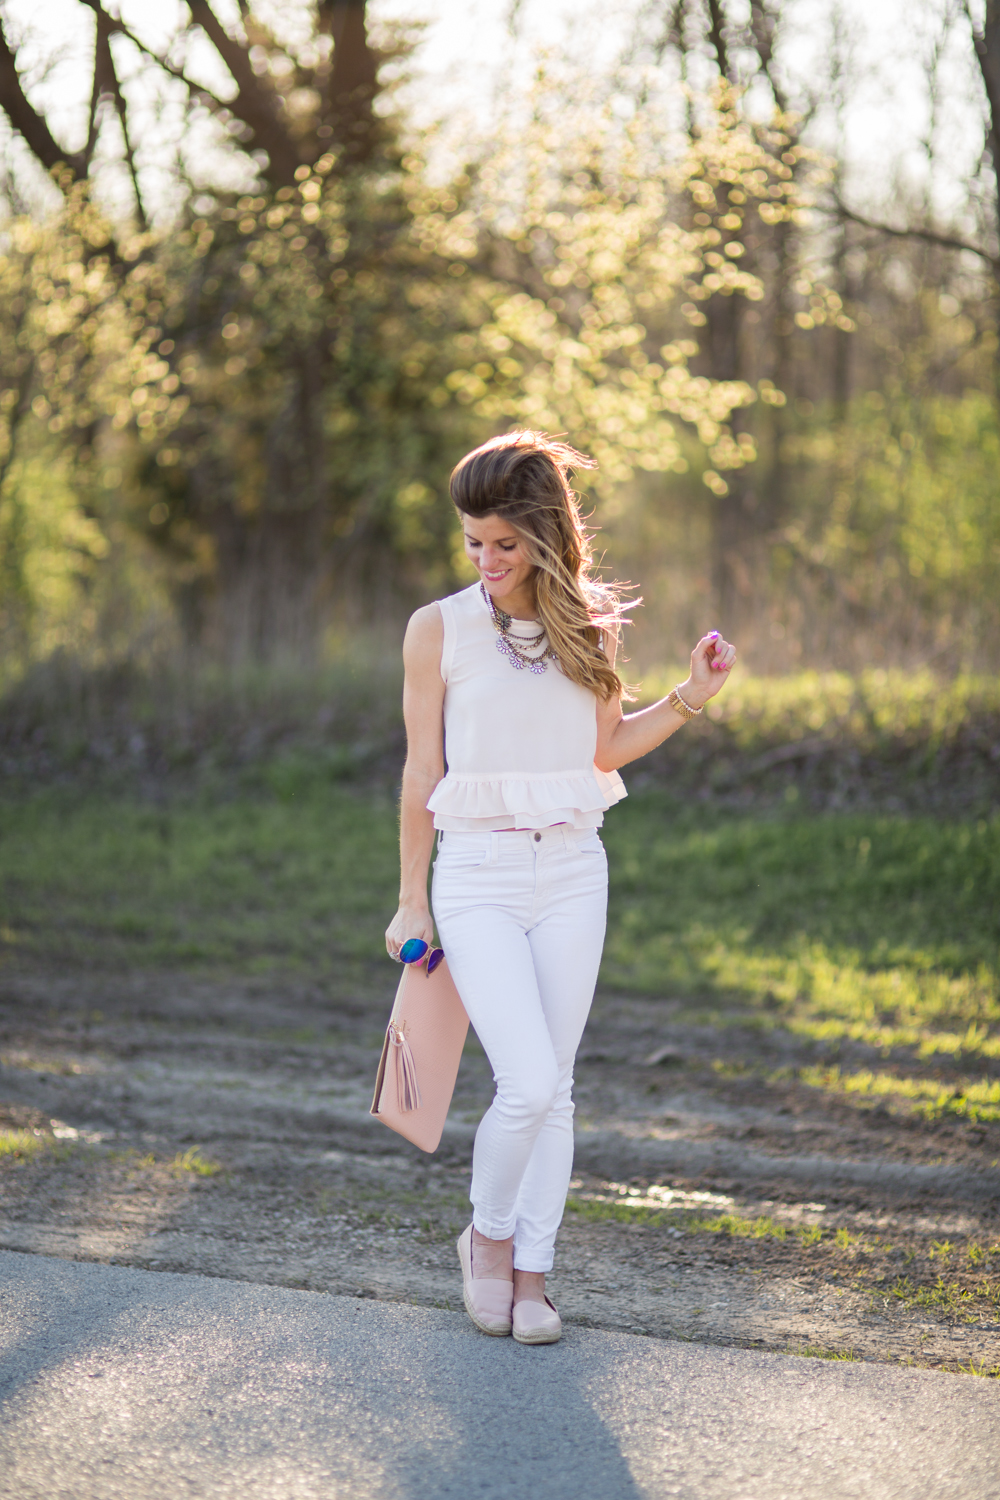 Blush Peplum Top and White Jeans6